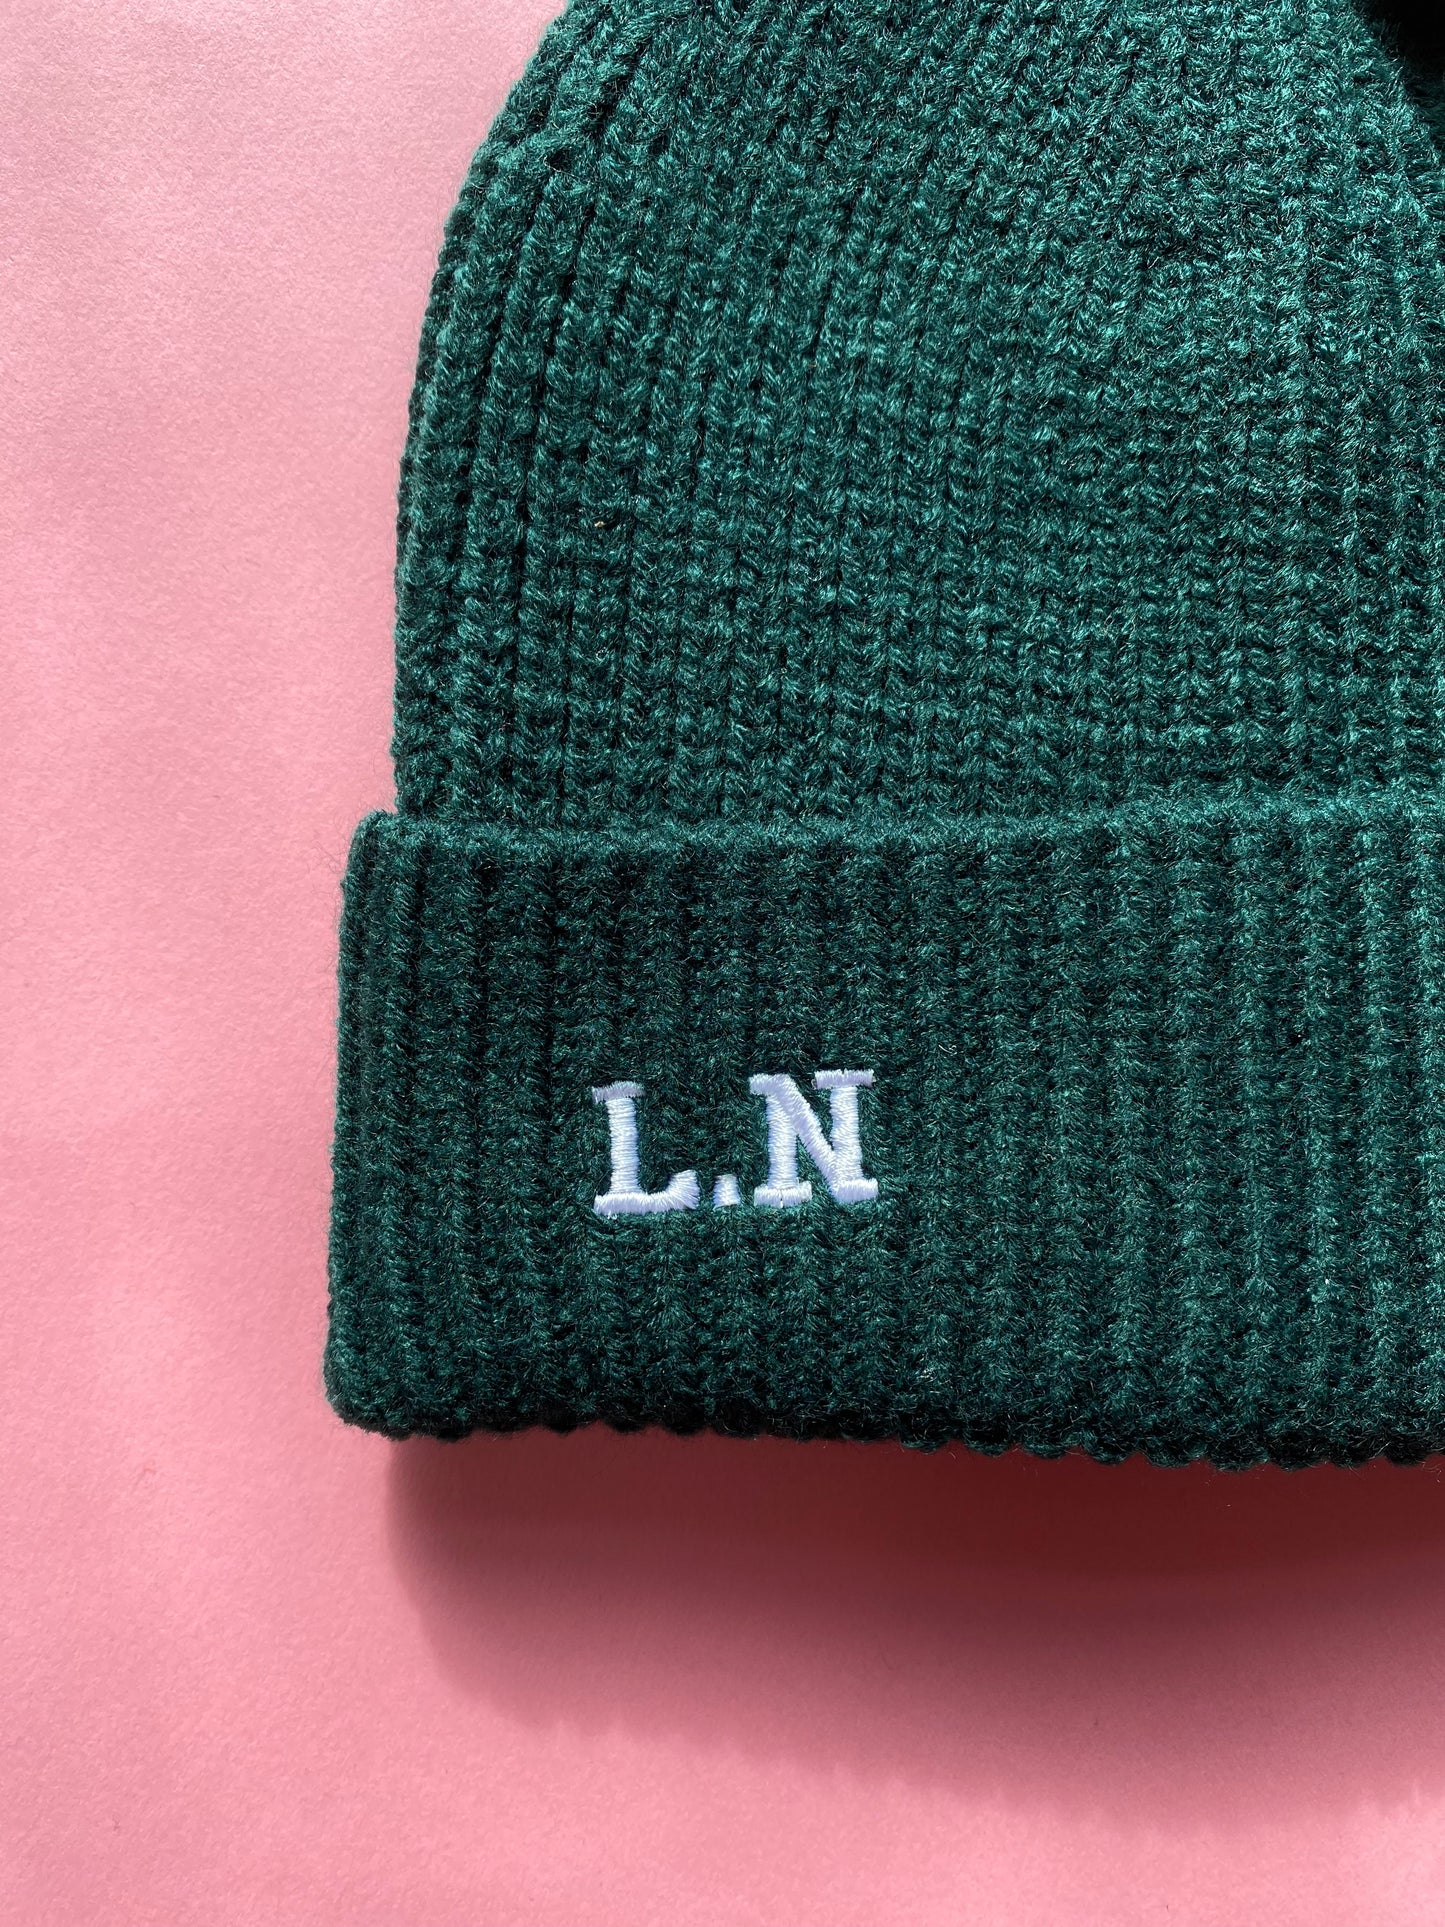 L.N Initials Embroidered Beanie Hat - Forest Green SALE